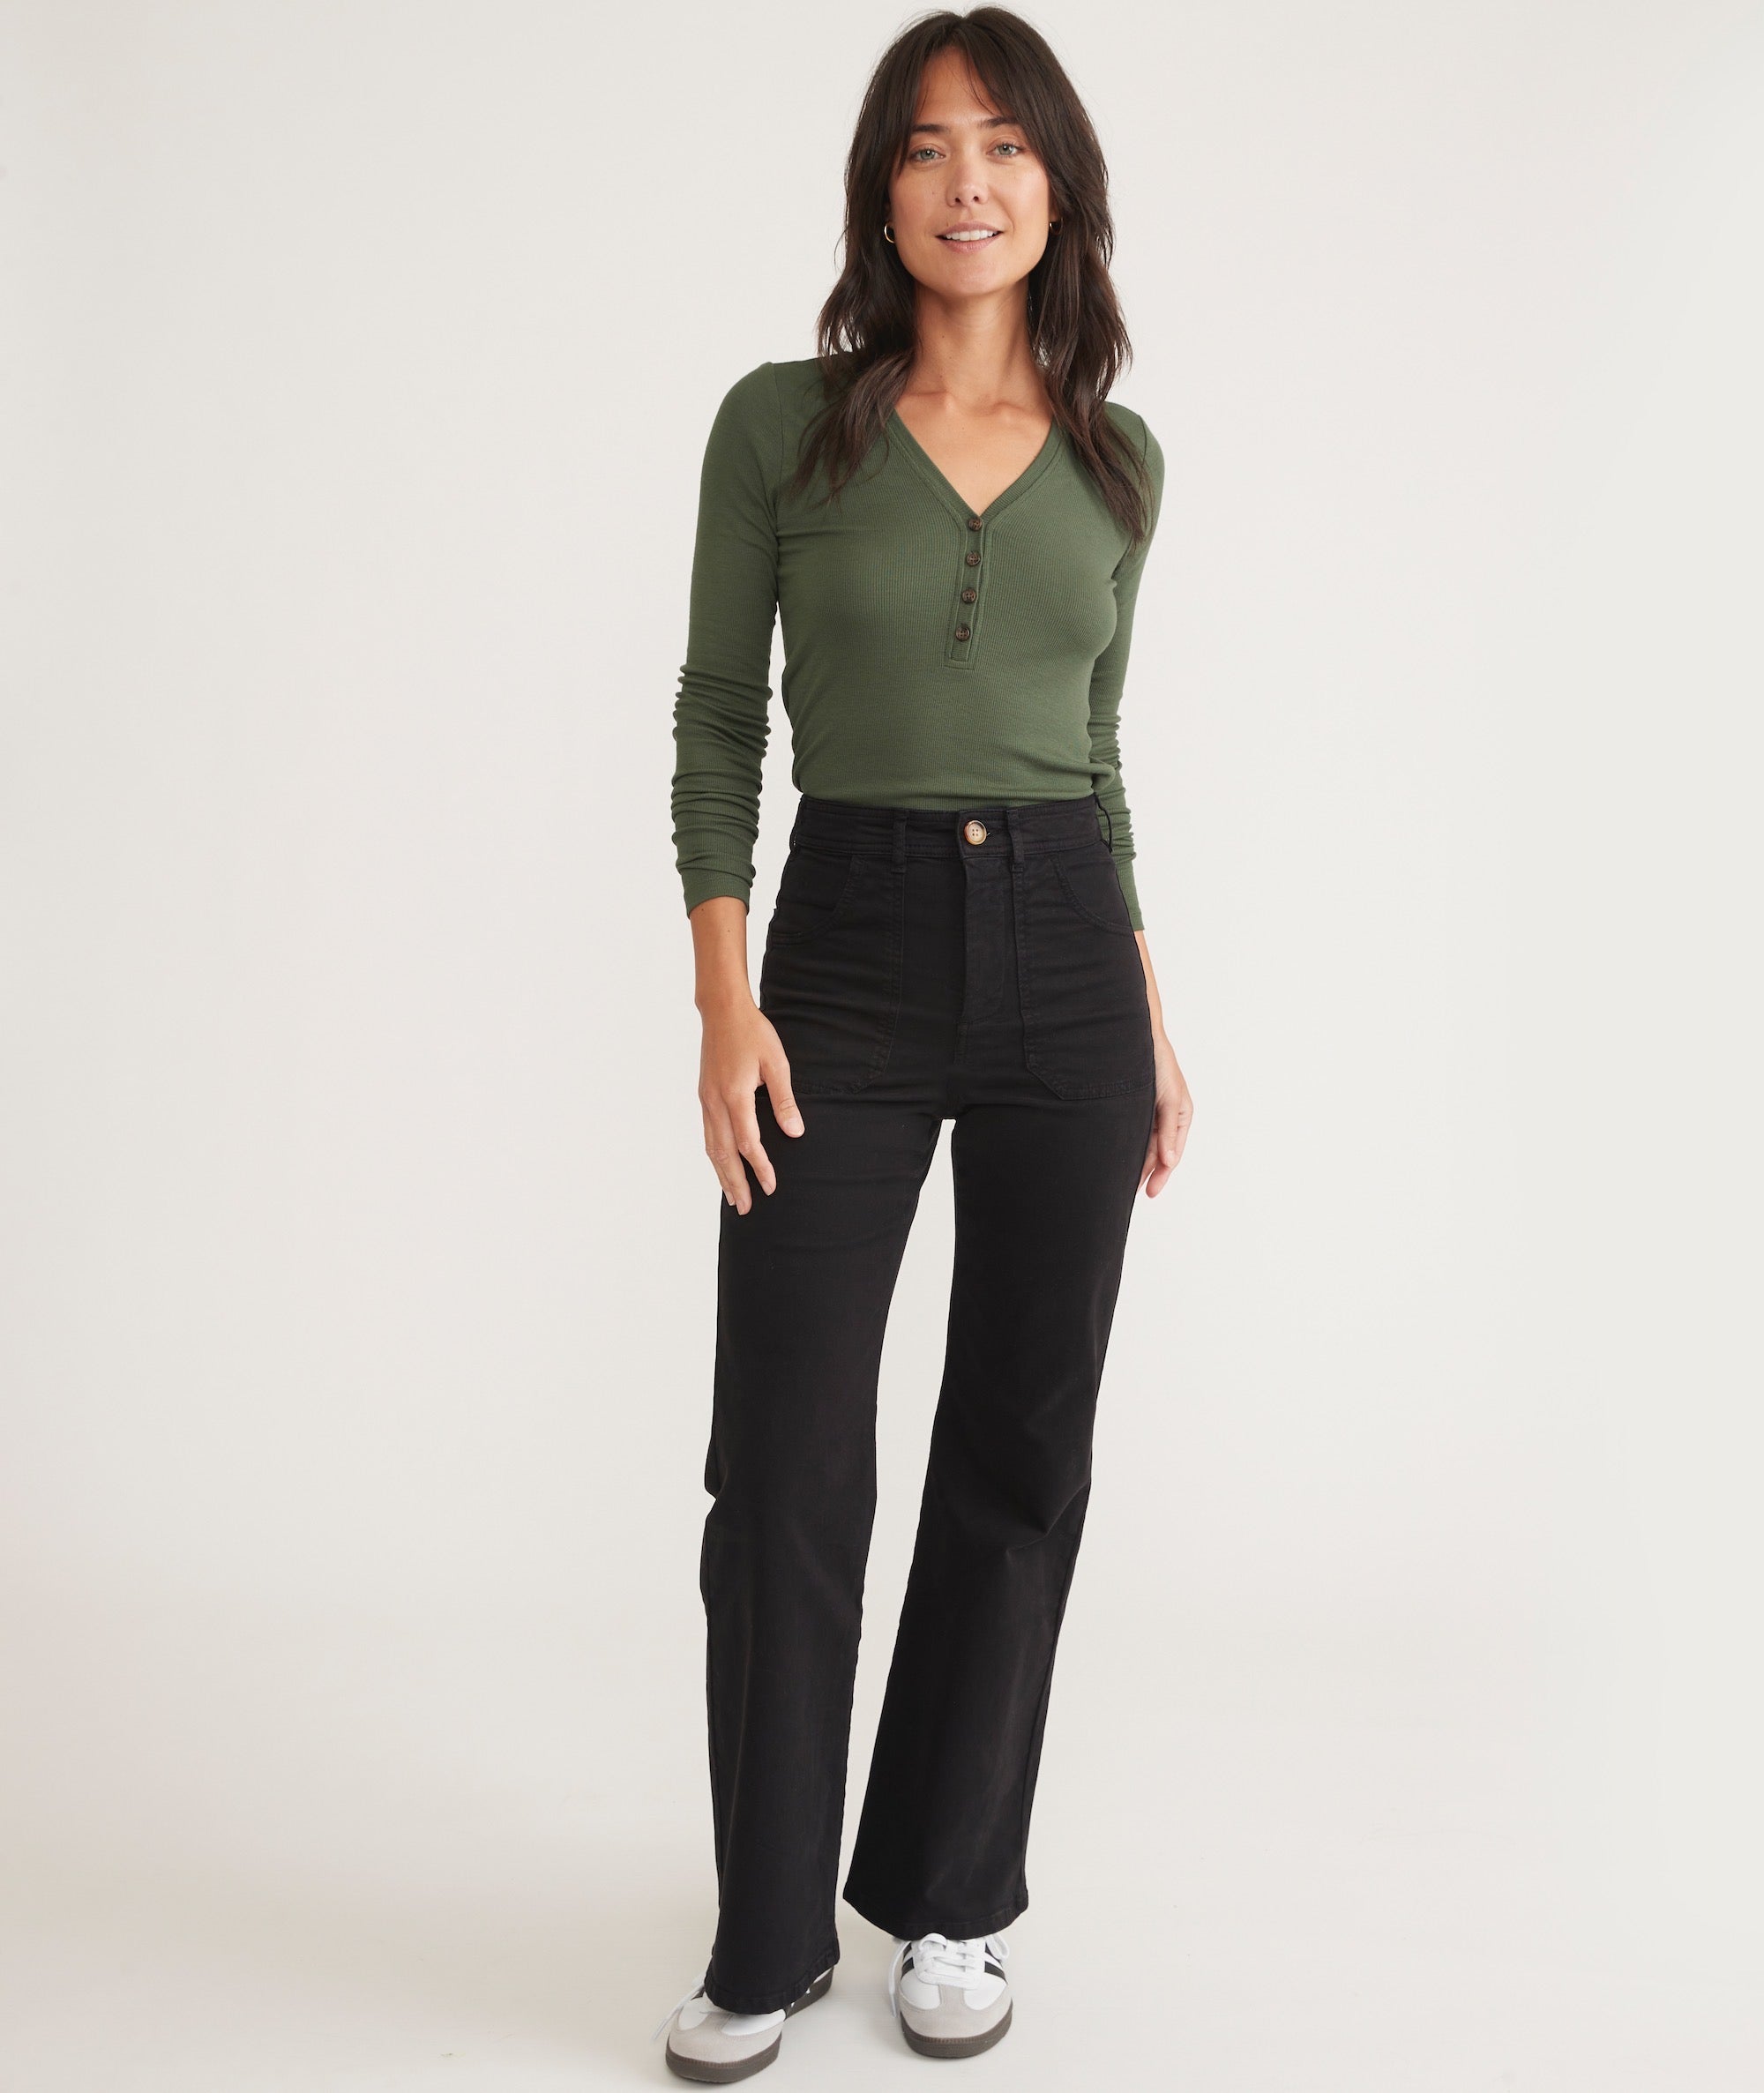 Ribbed Woven Trousers with Ring Detail in Stone Straight-Leg Cut